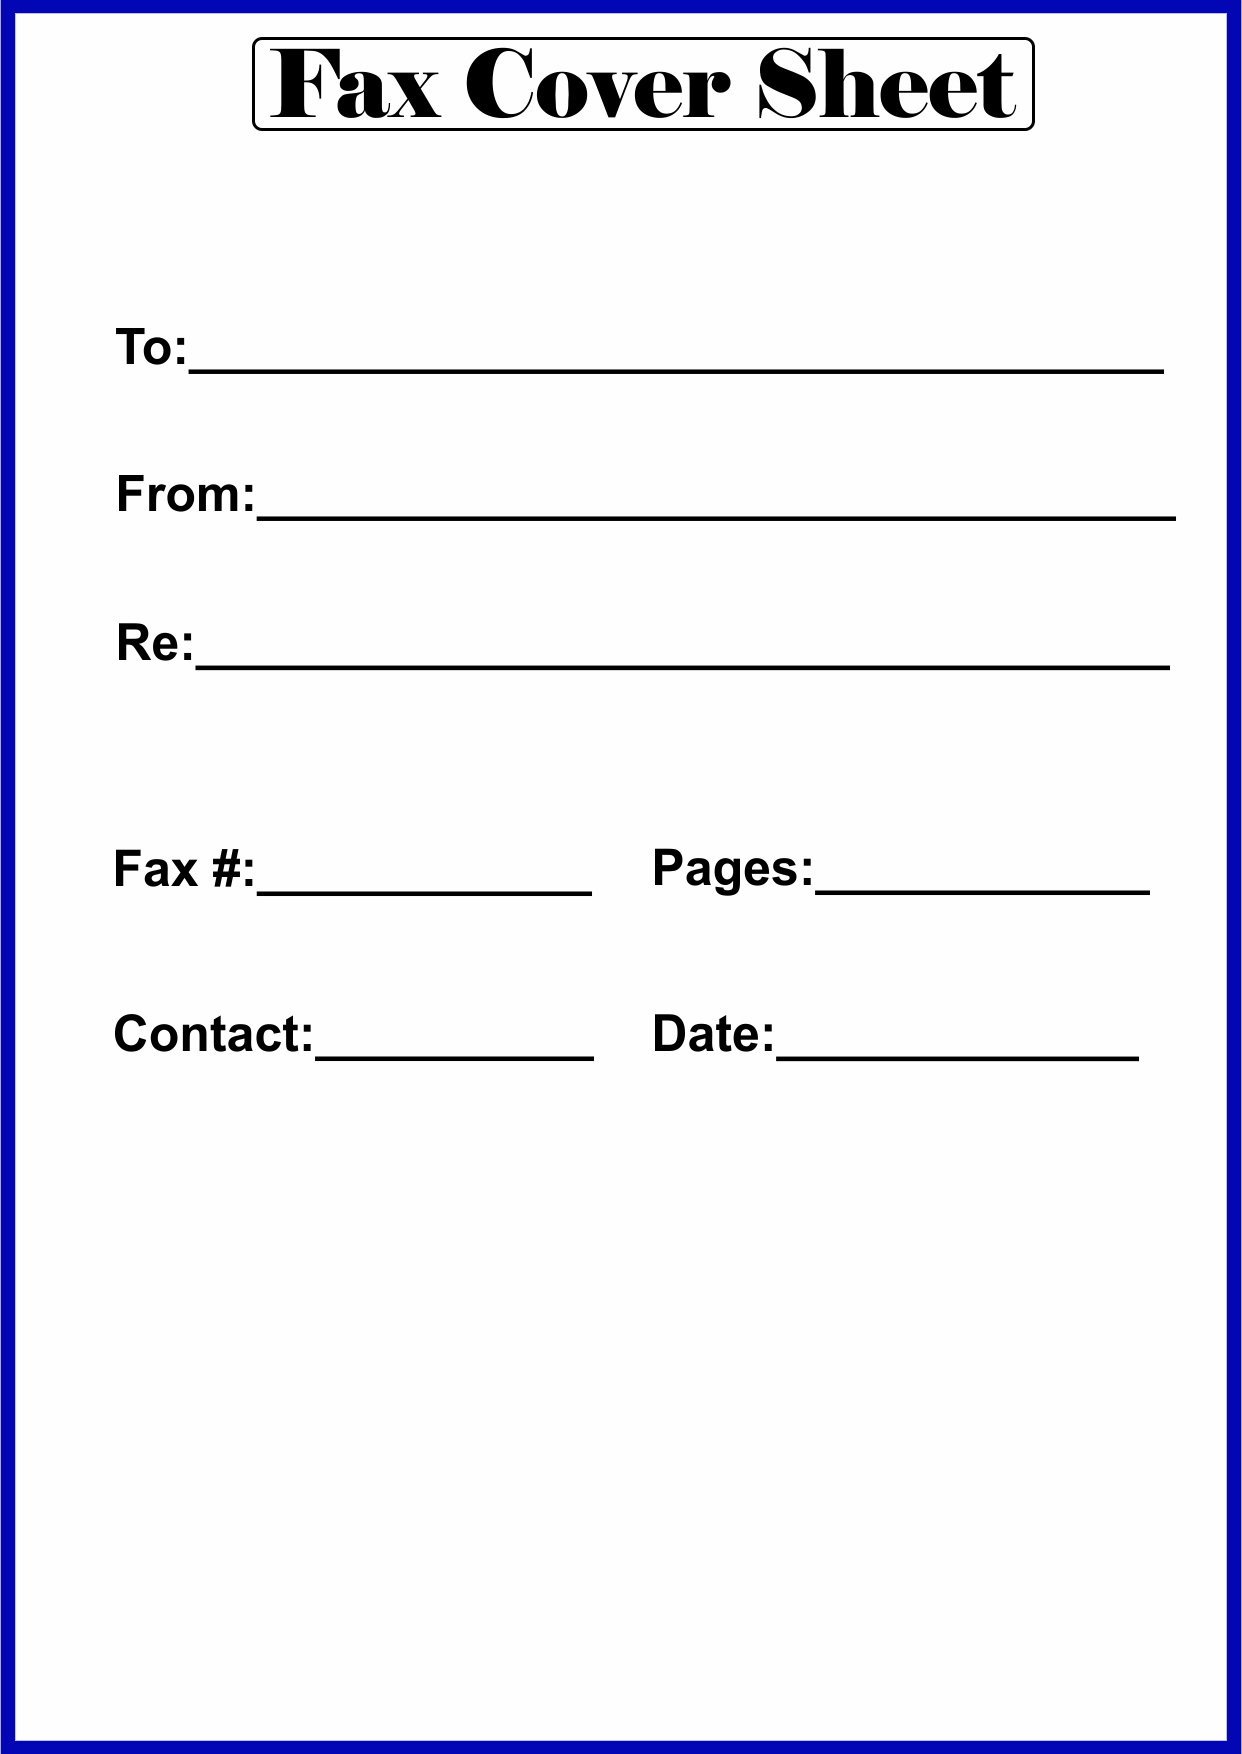 Free Fax Cover Page Template from faxcoversheethub.com